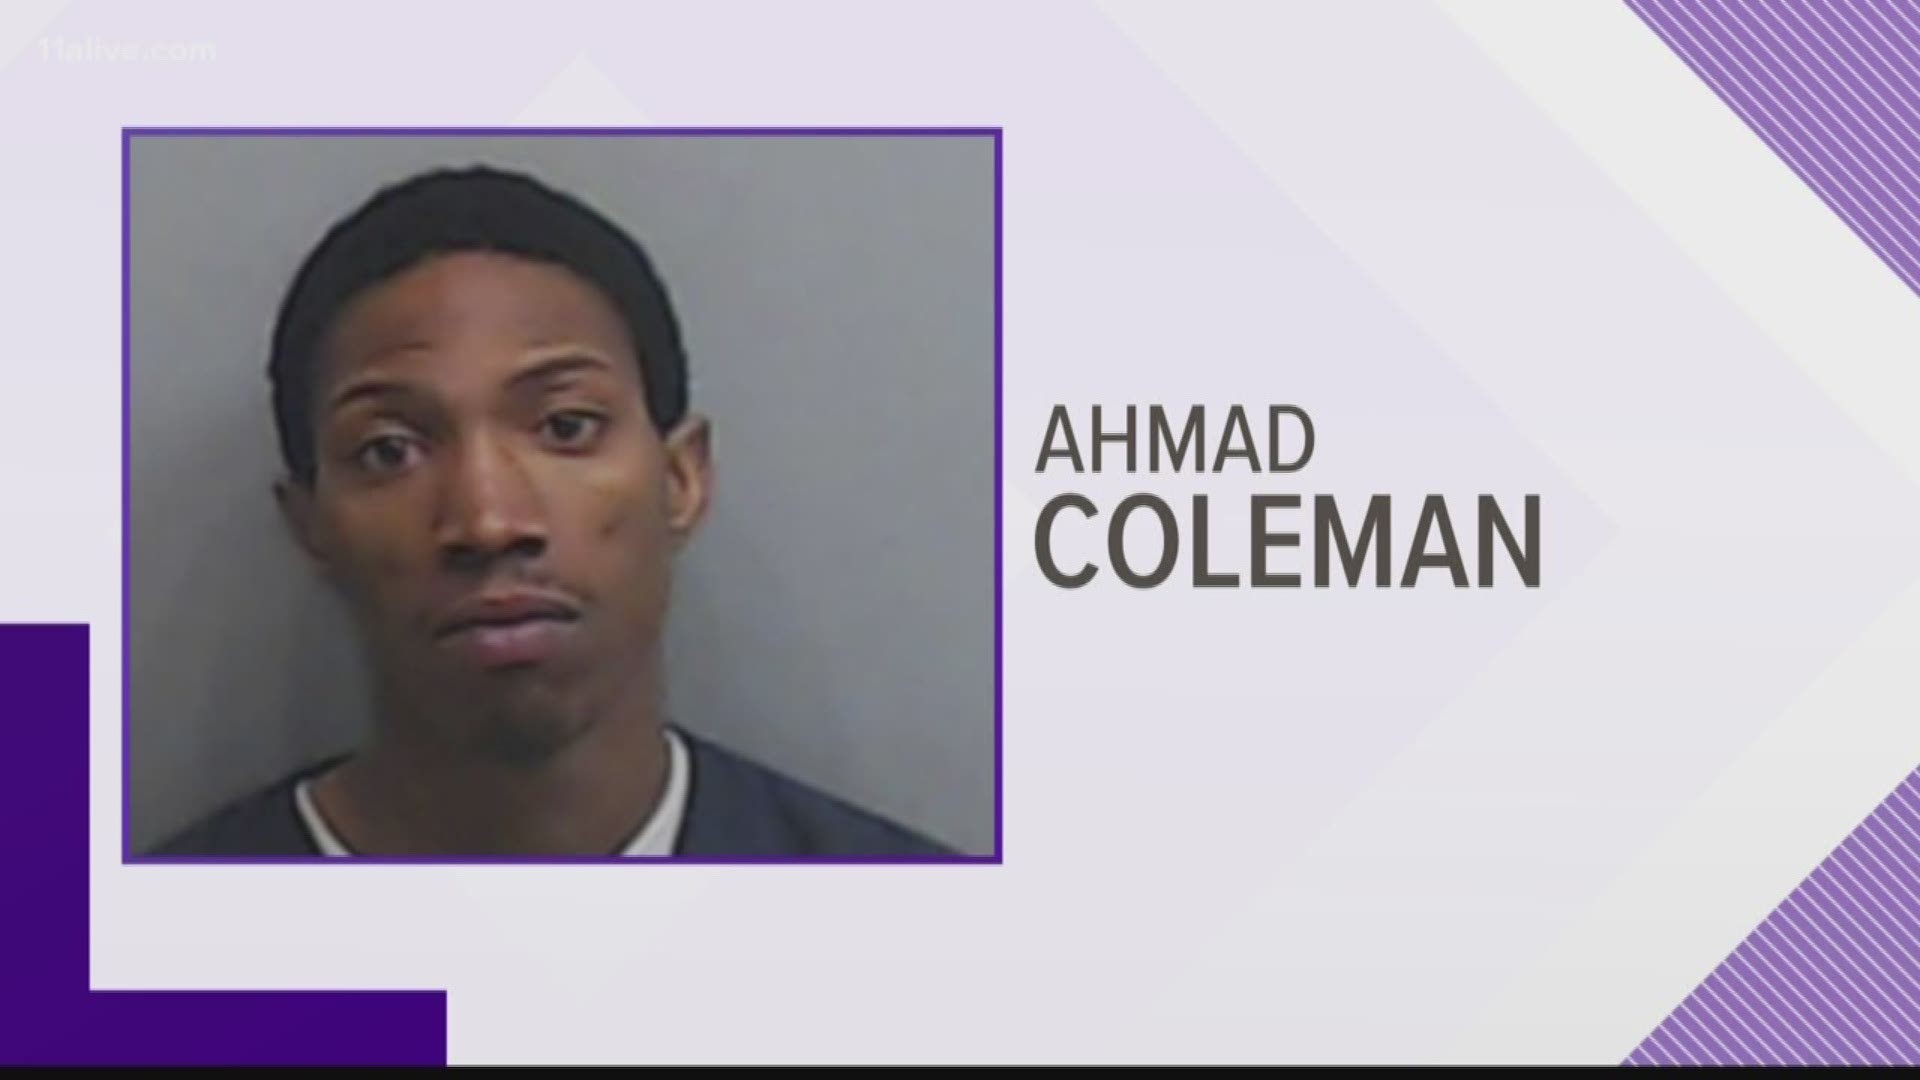 Ahmad Coleman, 25, was arrested in Mississippi with the help of U.S. Marshals, Atlanta Police said Monday.